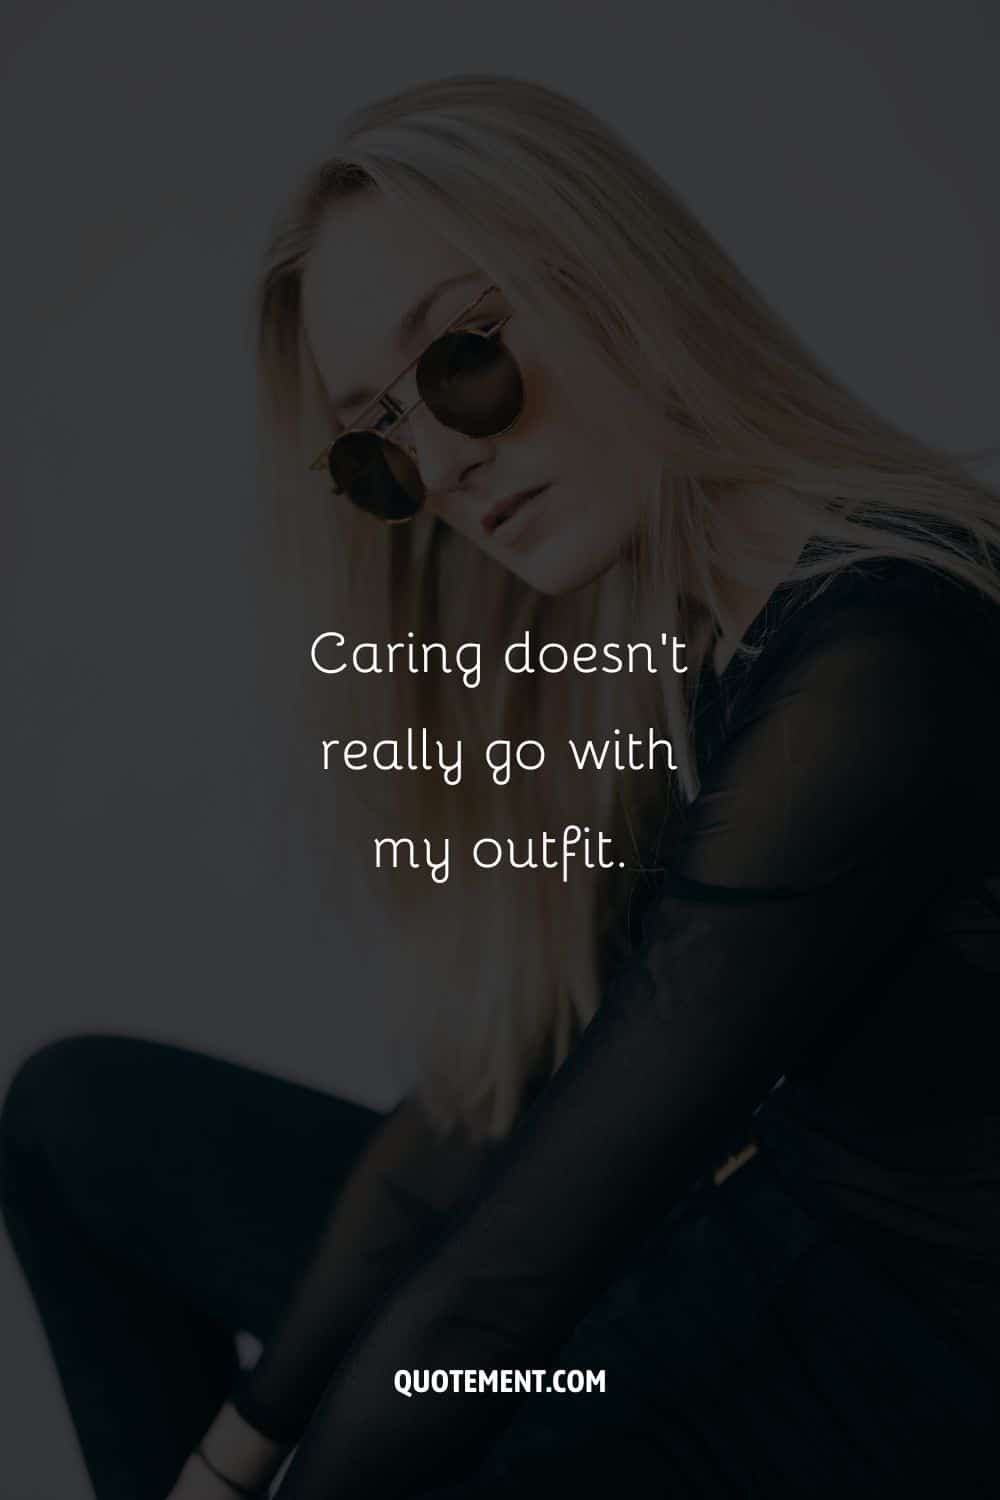 Caring doesn't really go with my outfit.